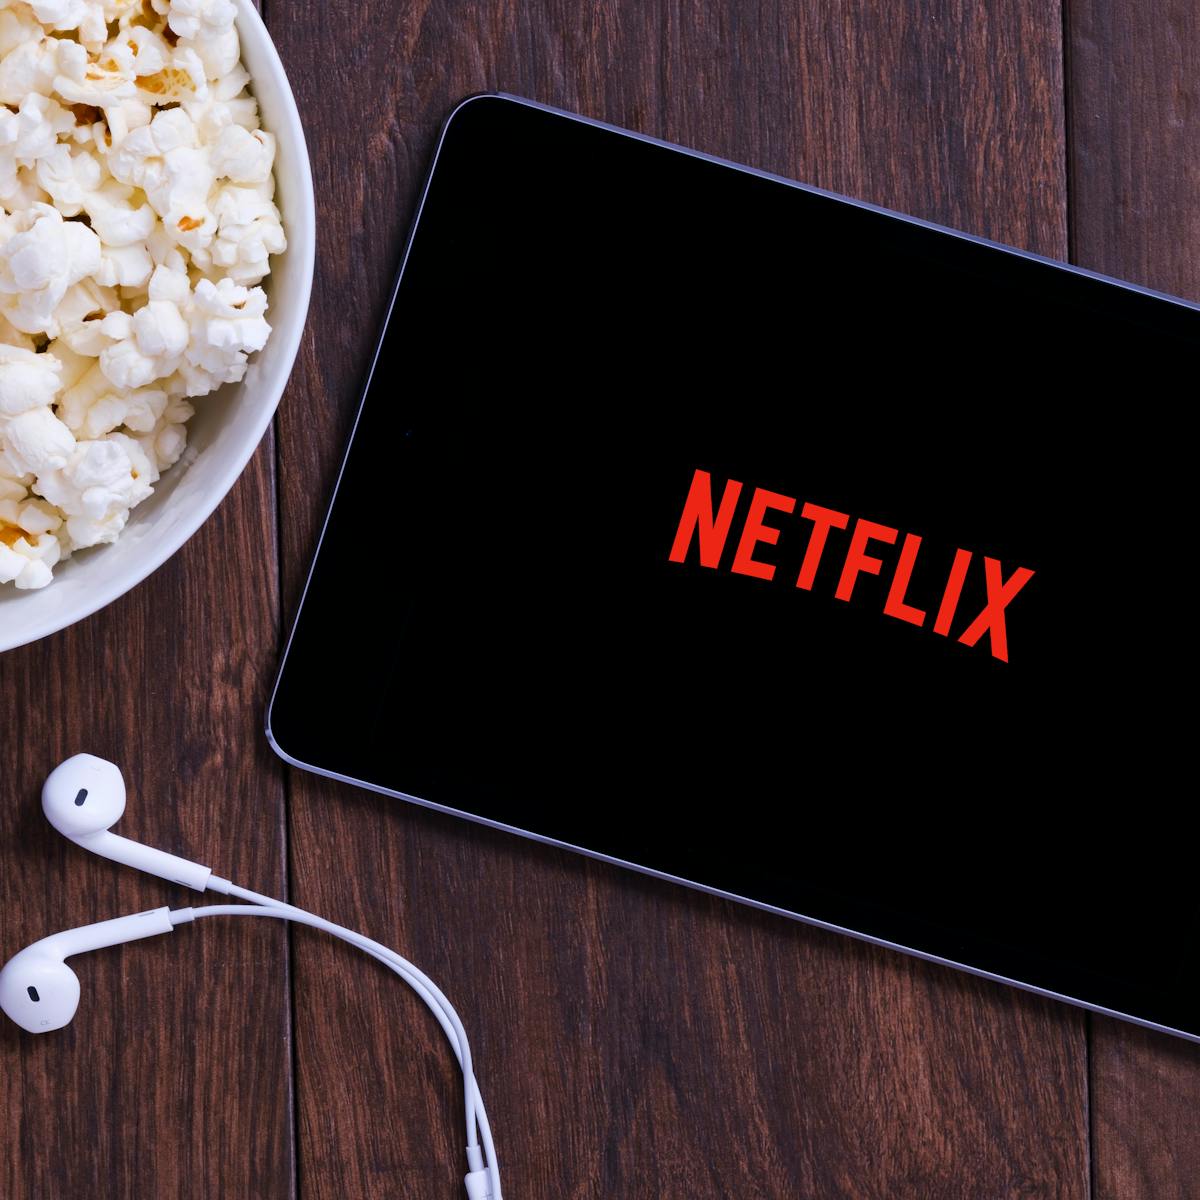 Netflix has capitalized on social isolation, but will its success continue in a post-coronavirus world?